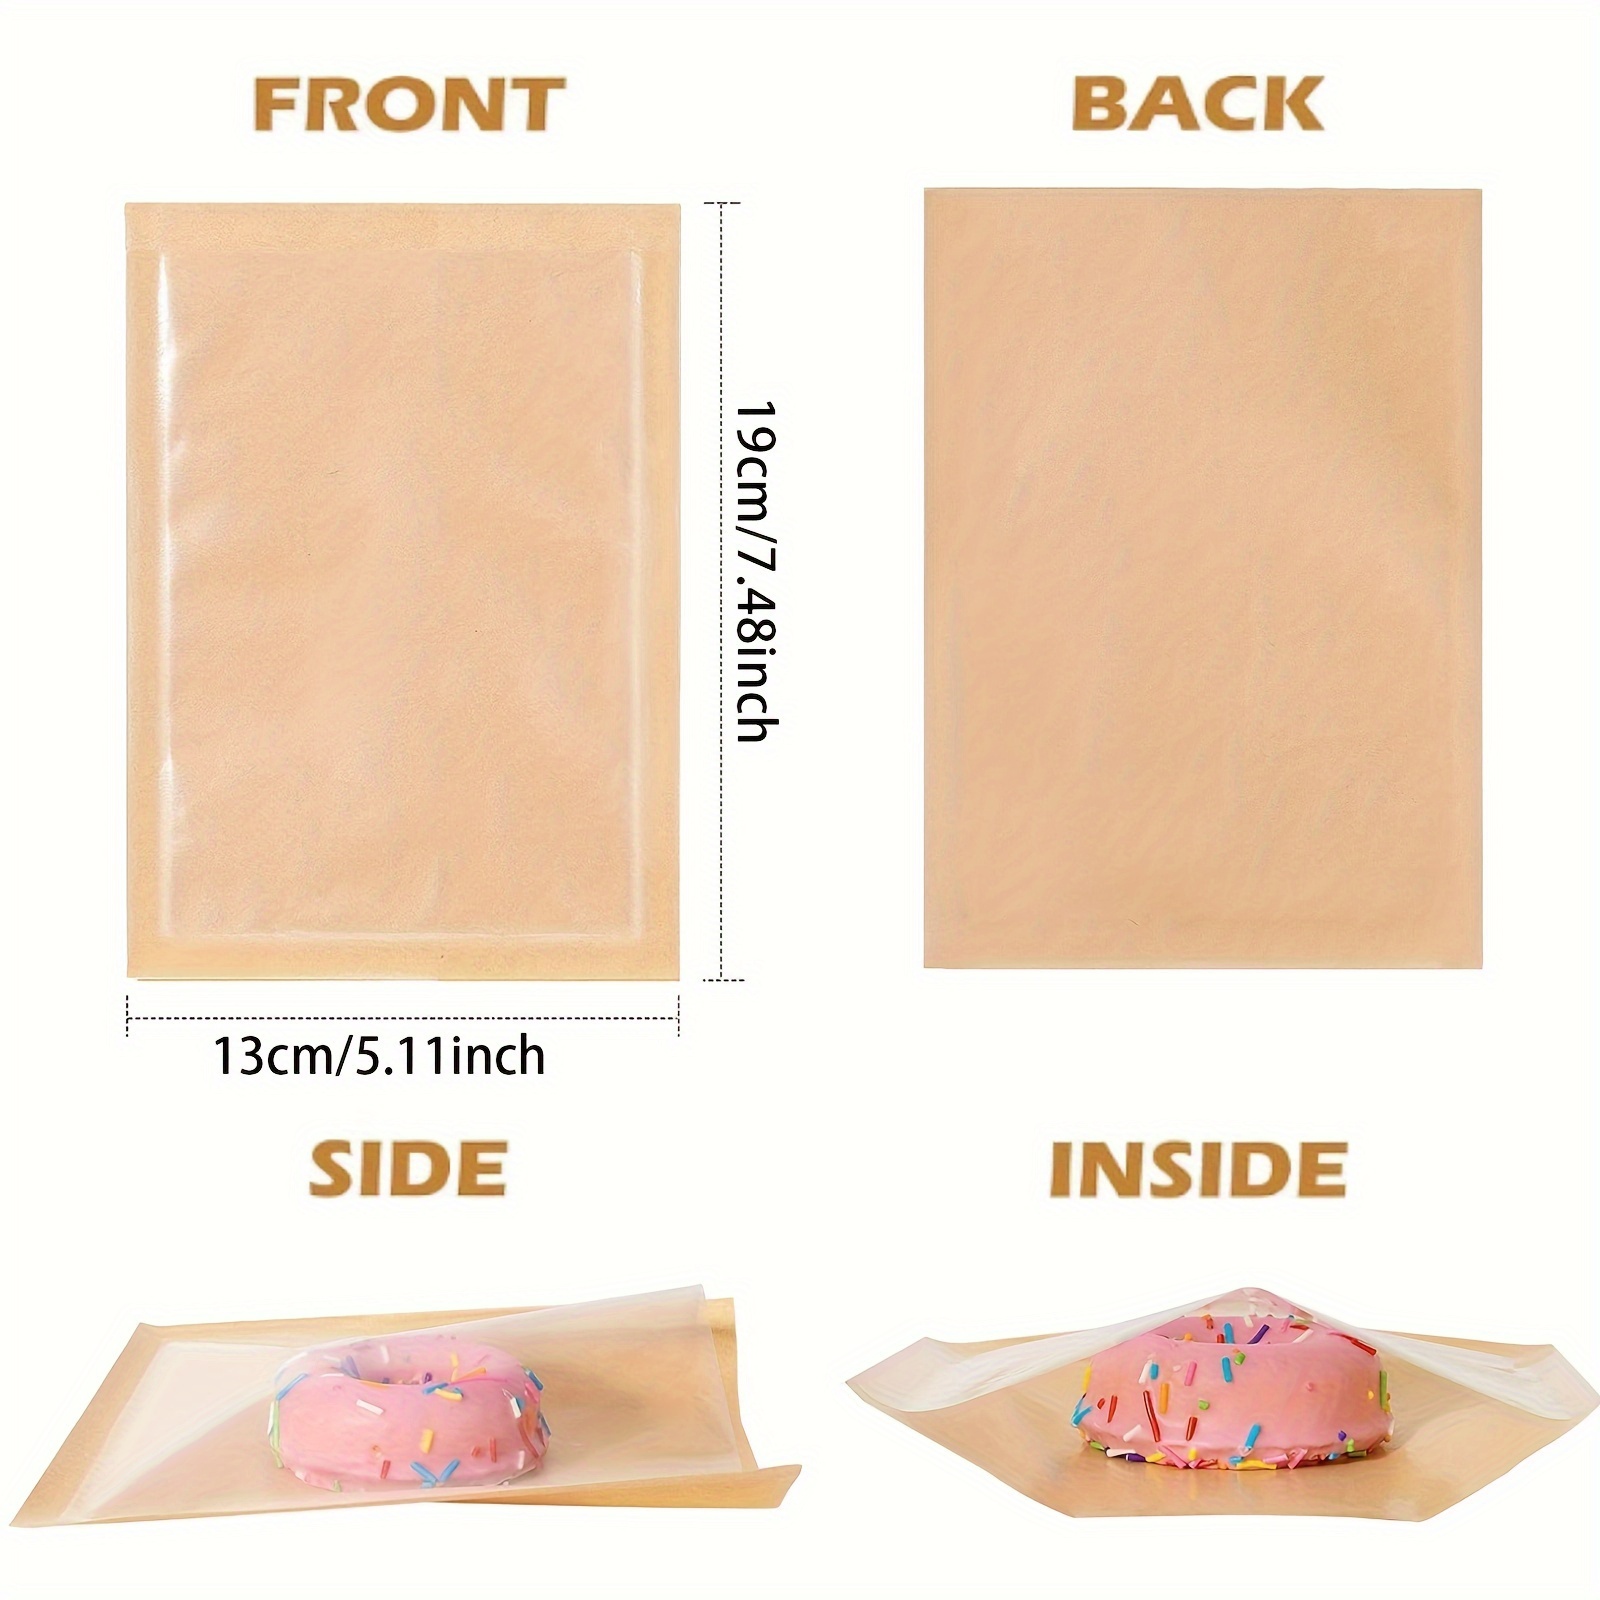 Bakery Bags With Clear Window, Kraft Bag, Grease Resistant Heat